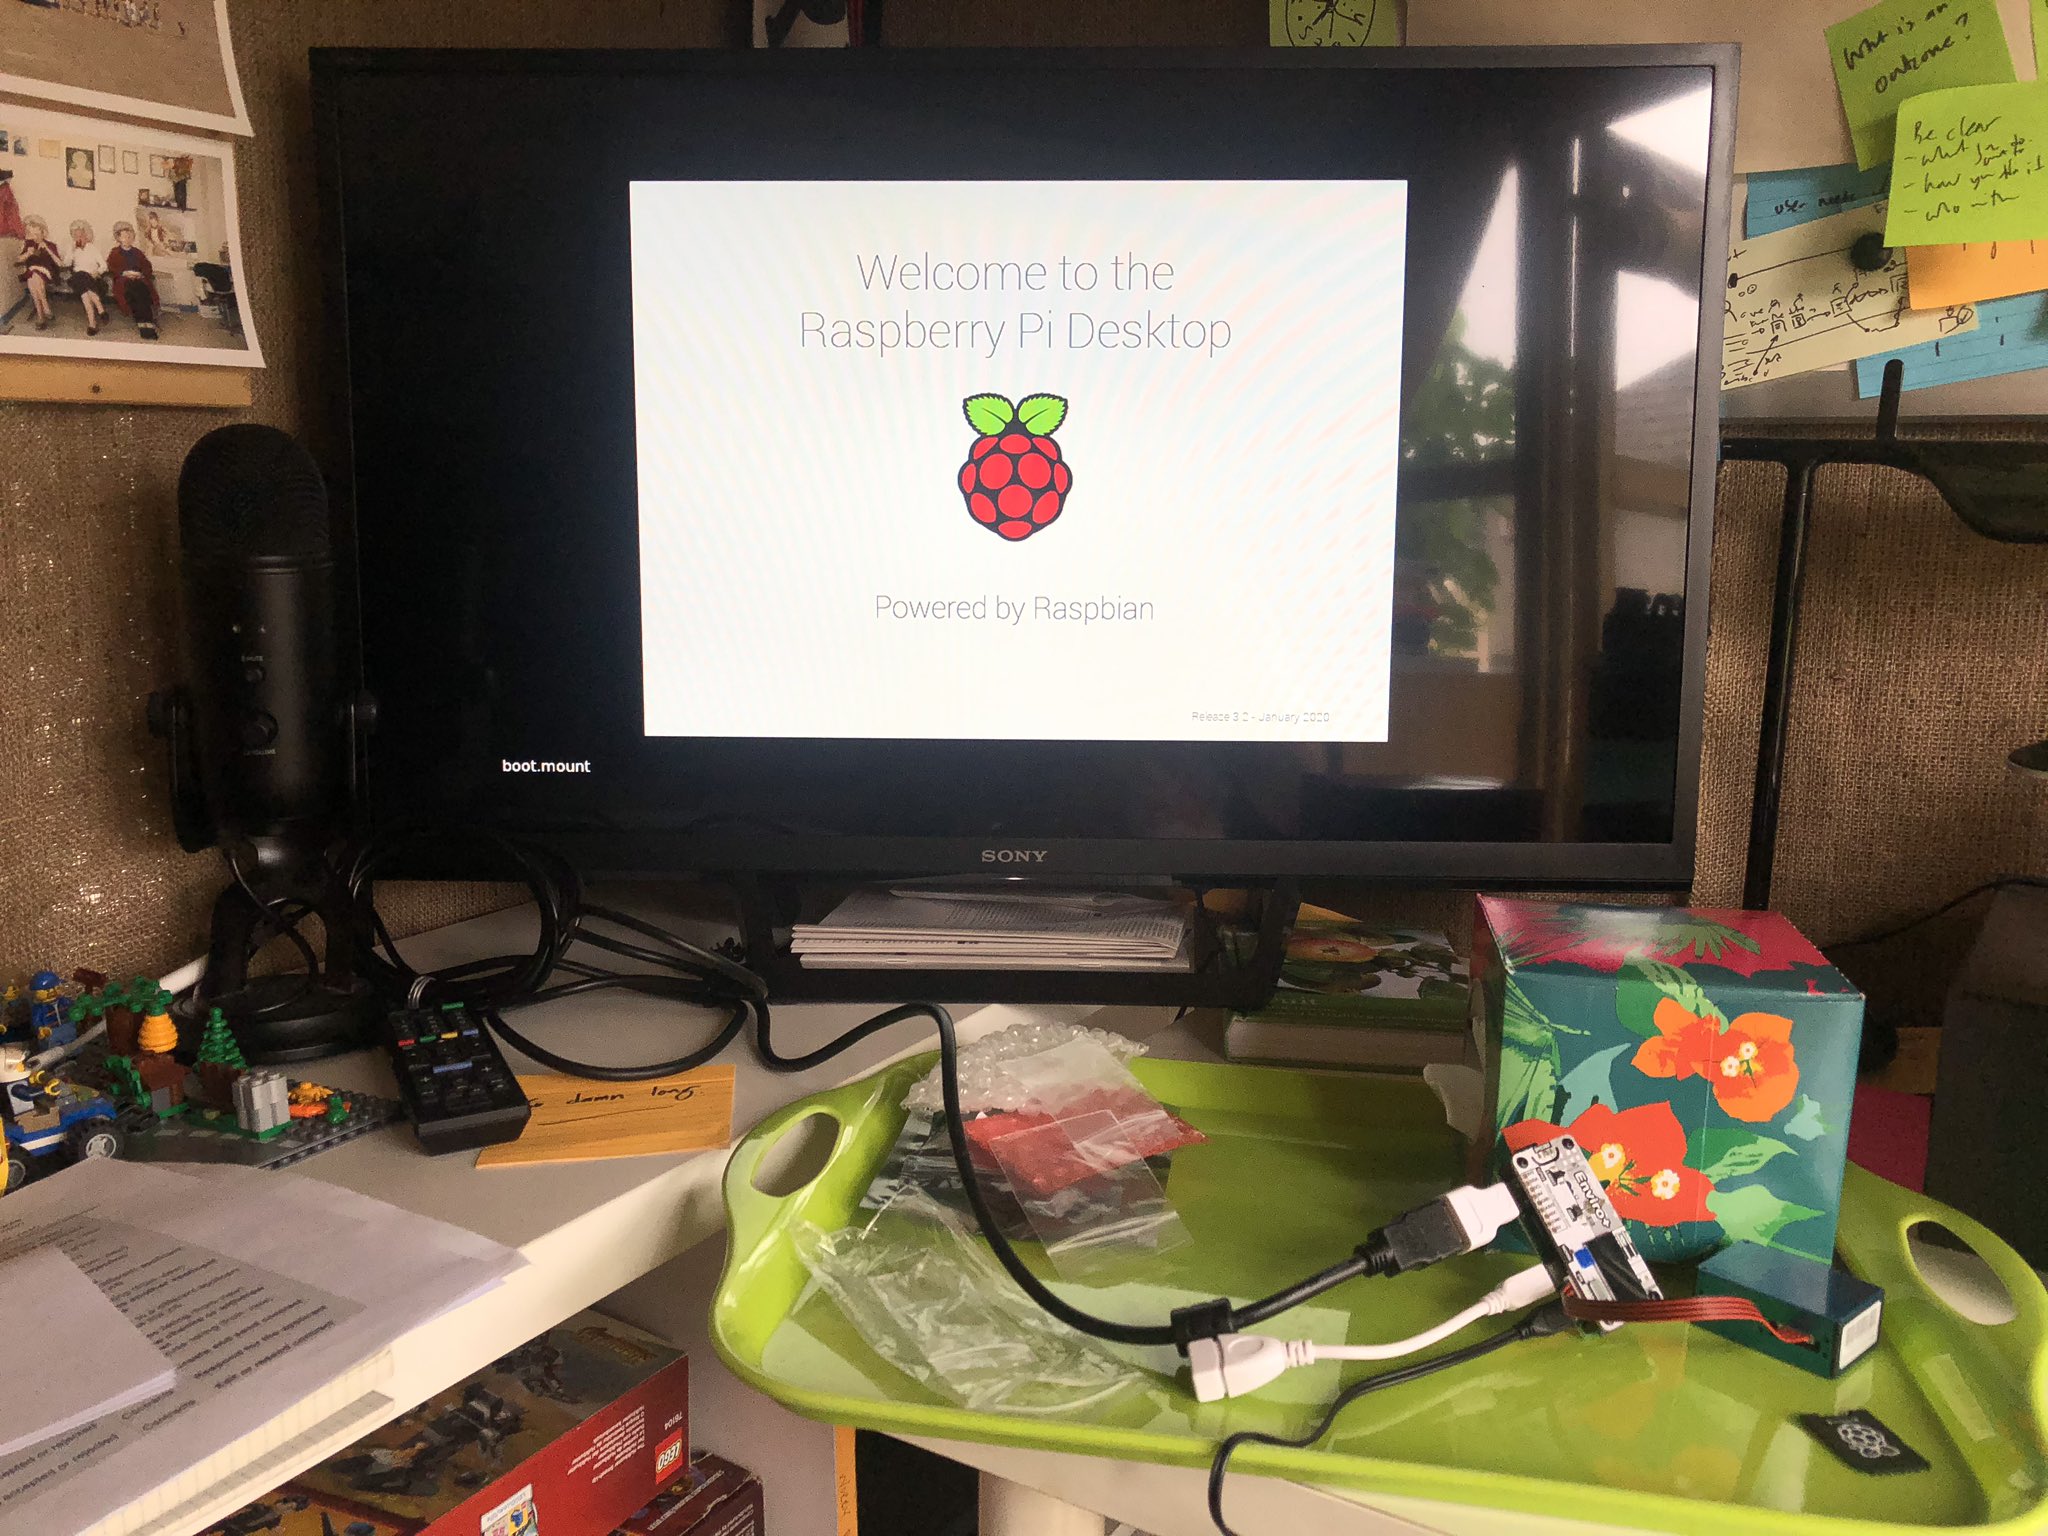 Connecting everything and setting the Pi up